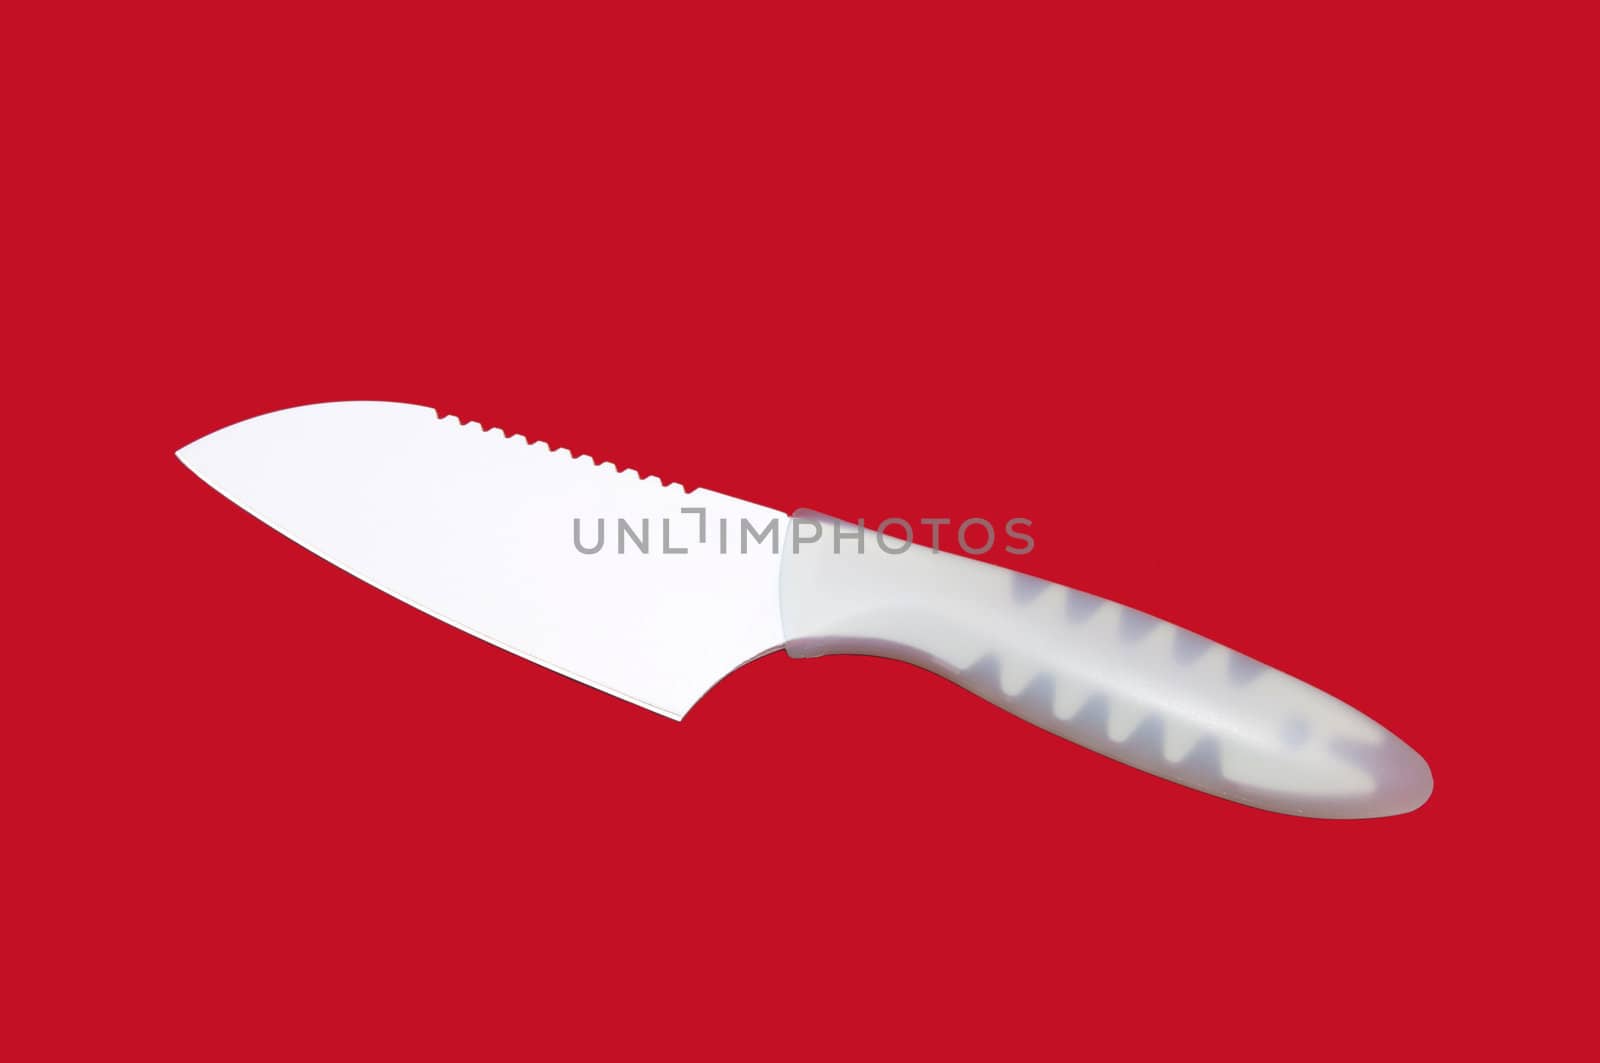 carving knife by Lester120